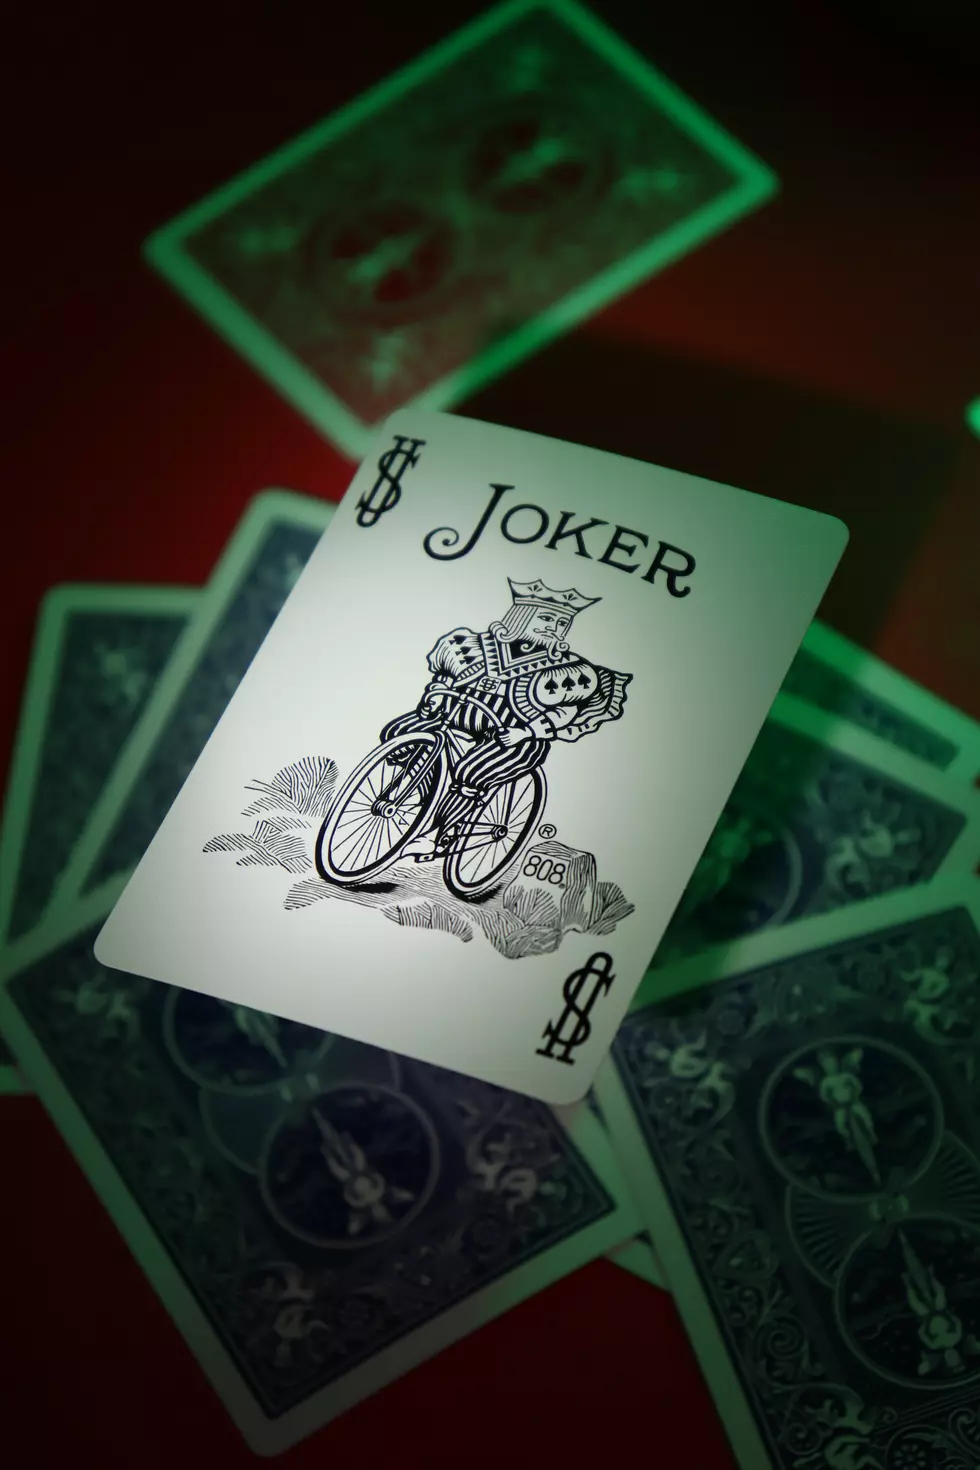 The Joker Card Was Originally Created For Michigan’s Favorite Card Game